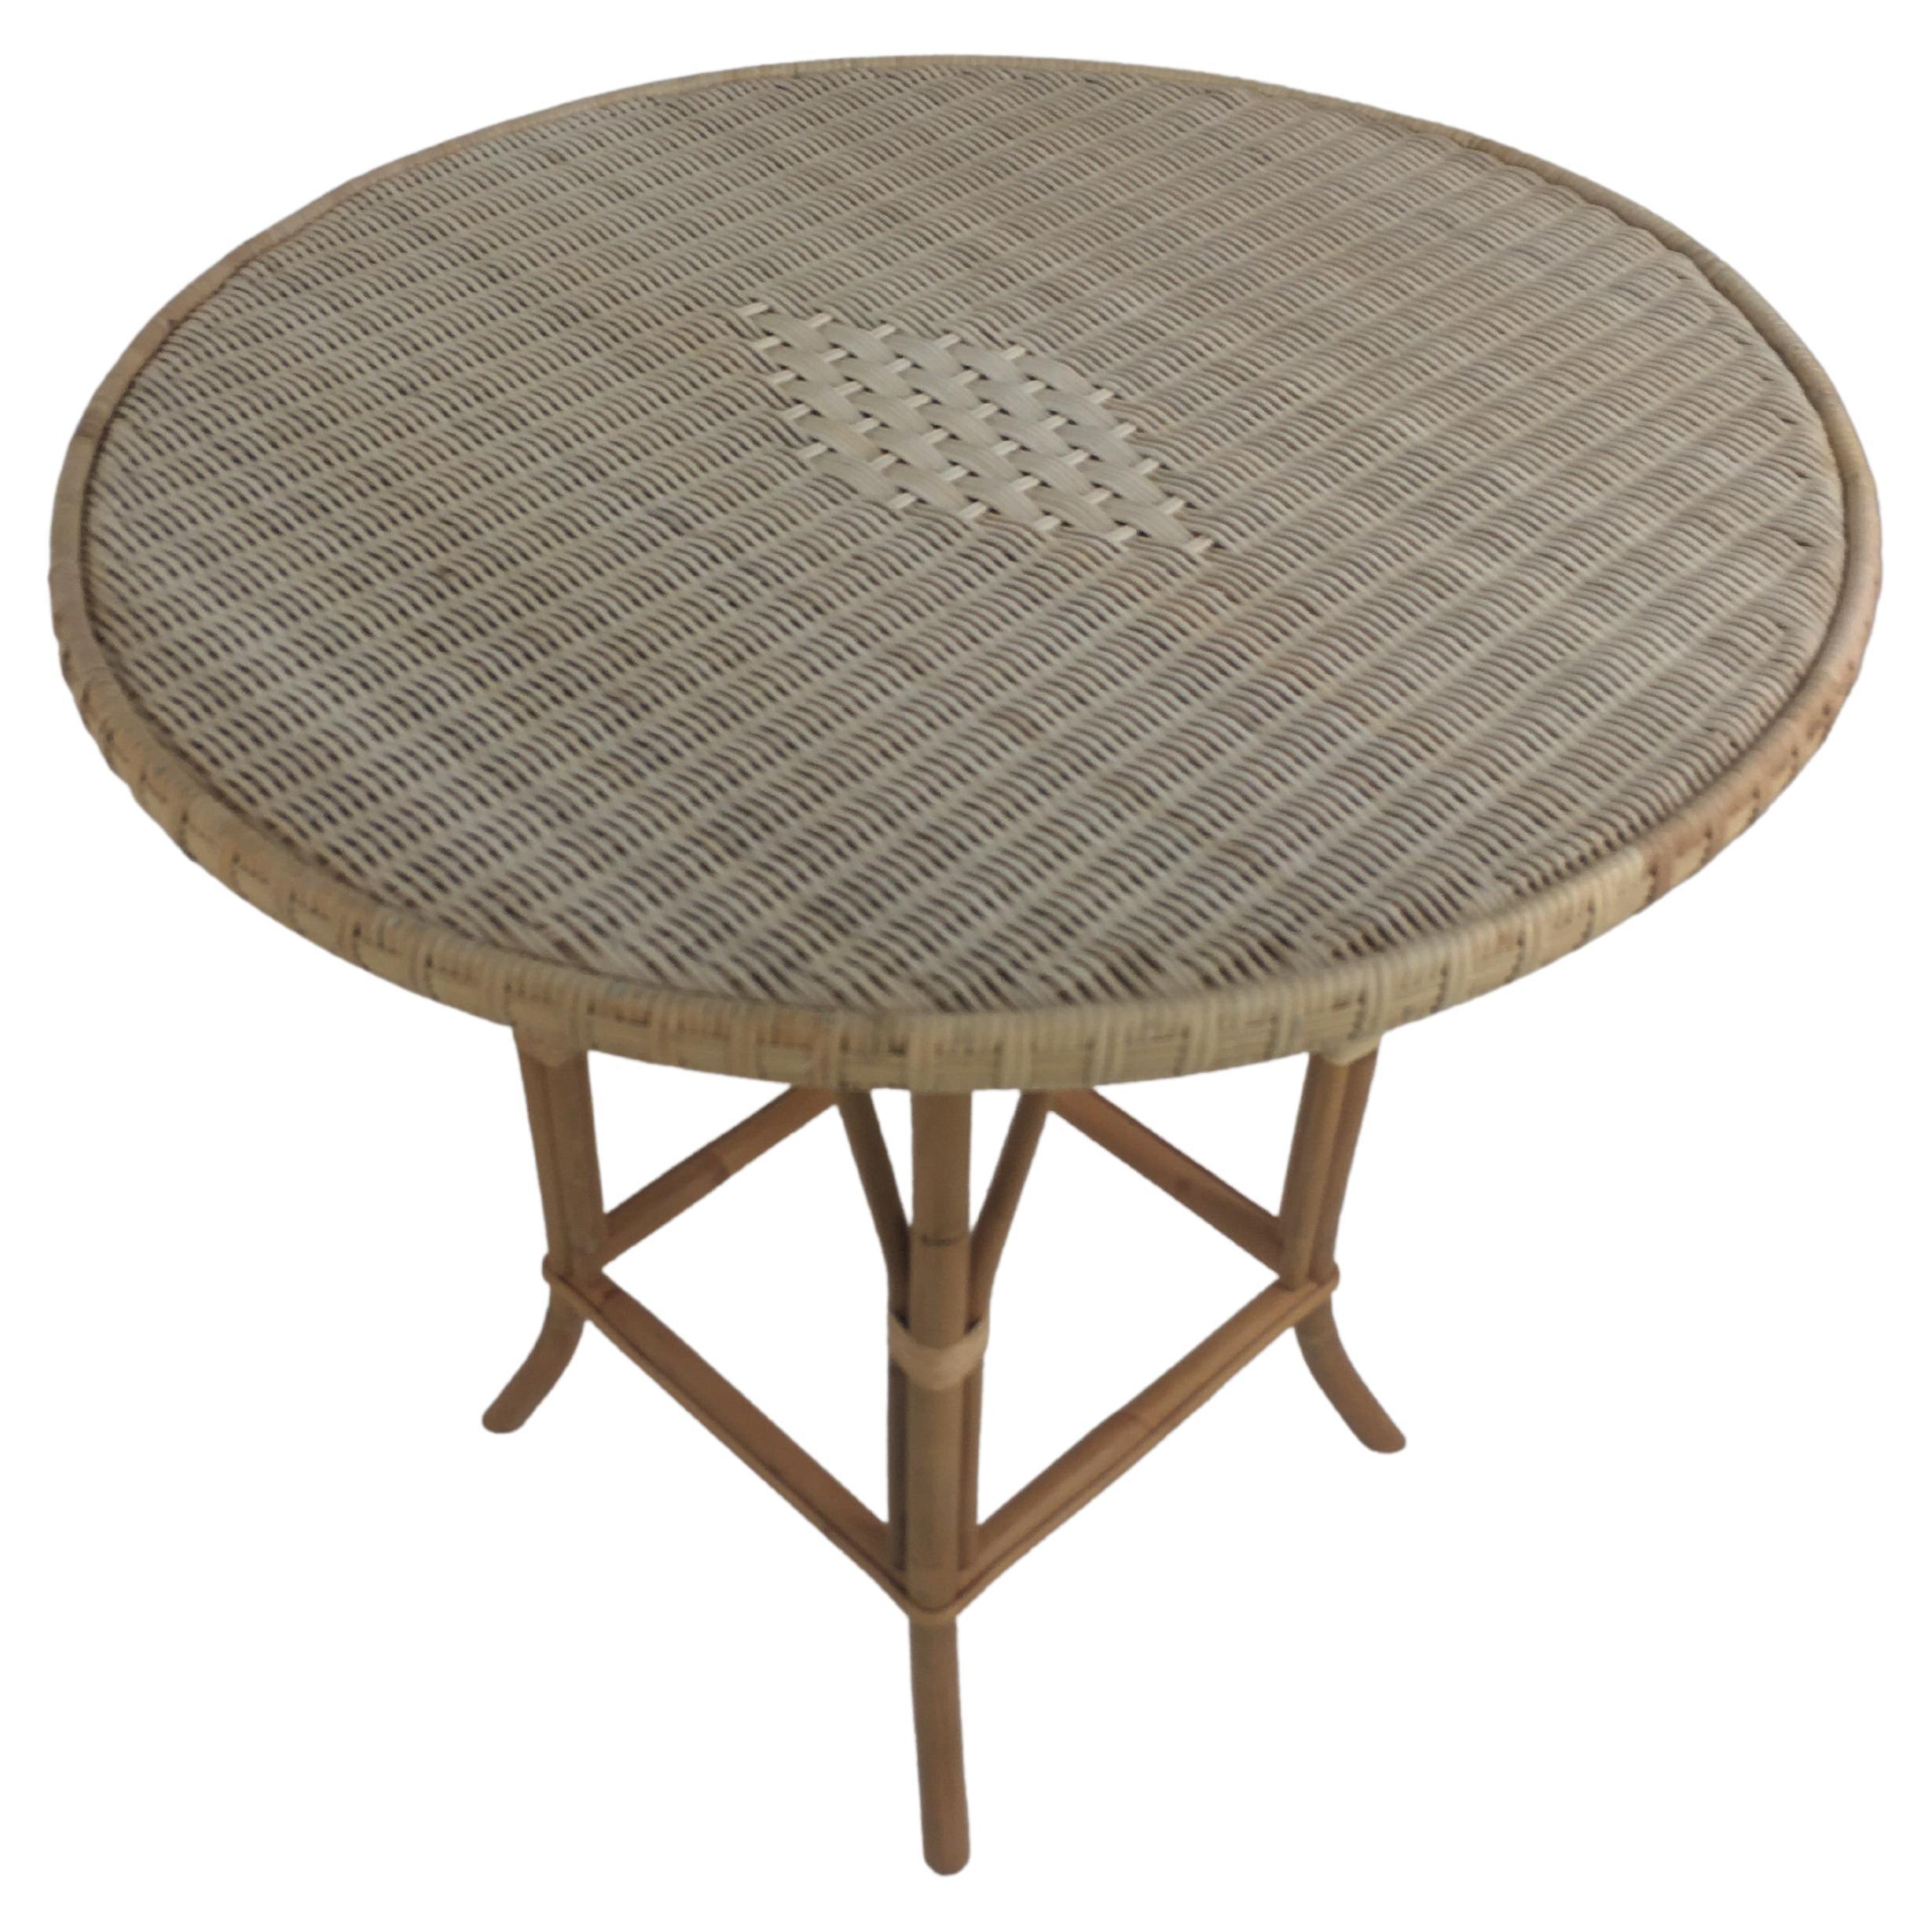 French 1900s Design Bistro Round Pedestal Table in Rattan and Wicker Cane For Sale